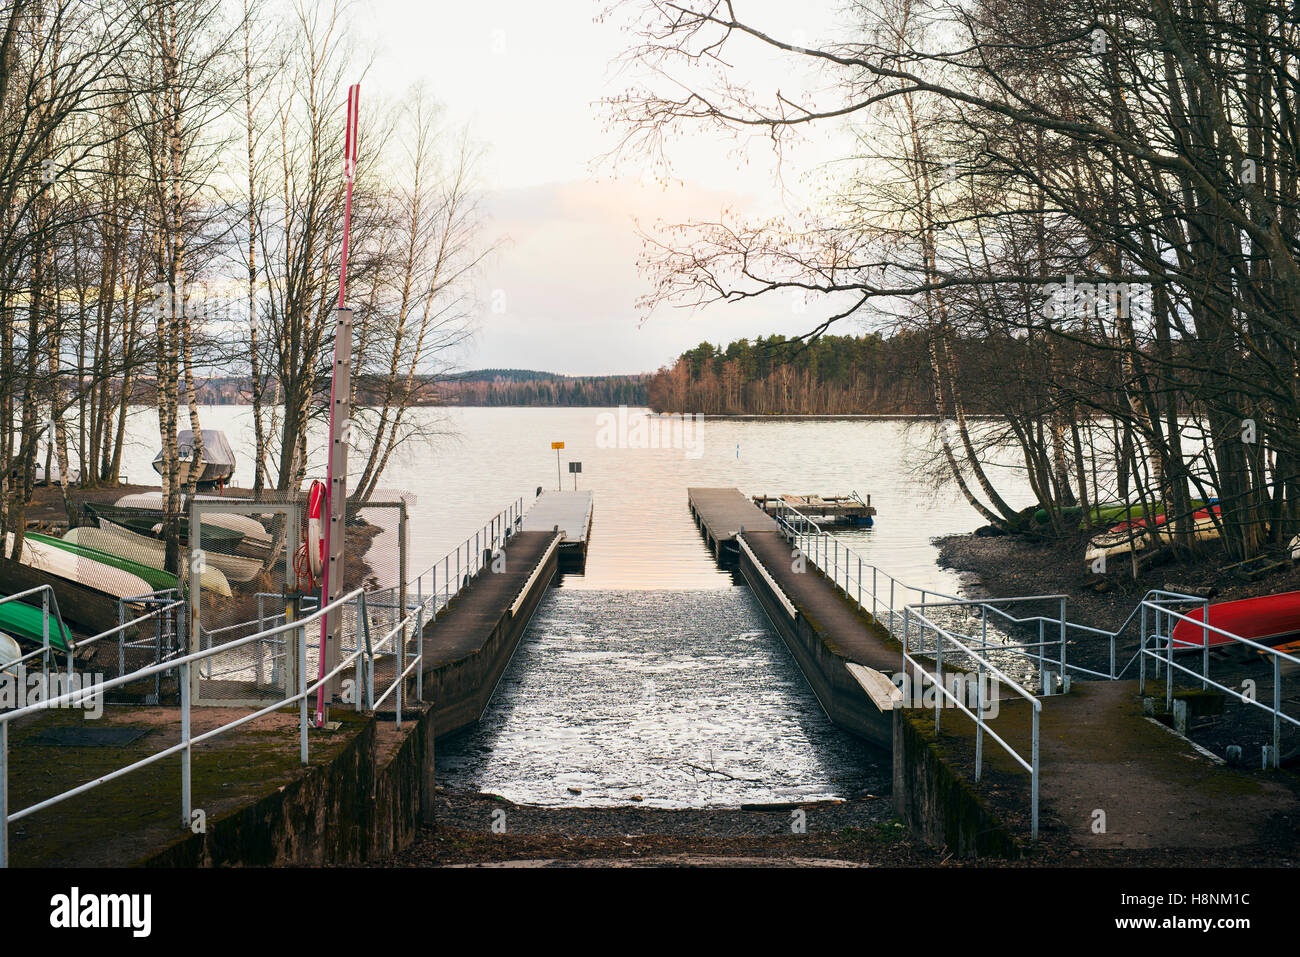 Harbour on lake among forests Stock Photo